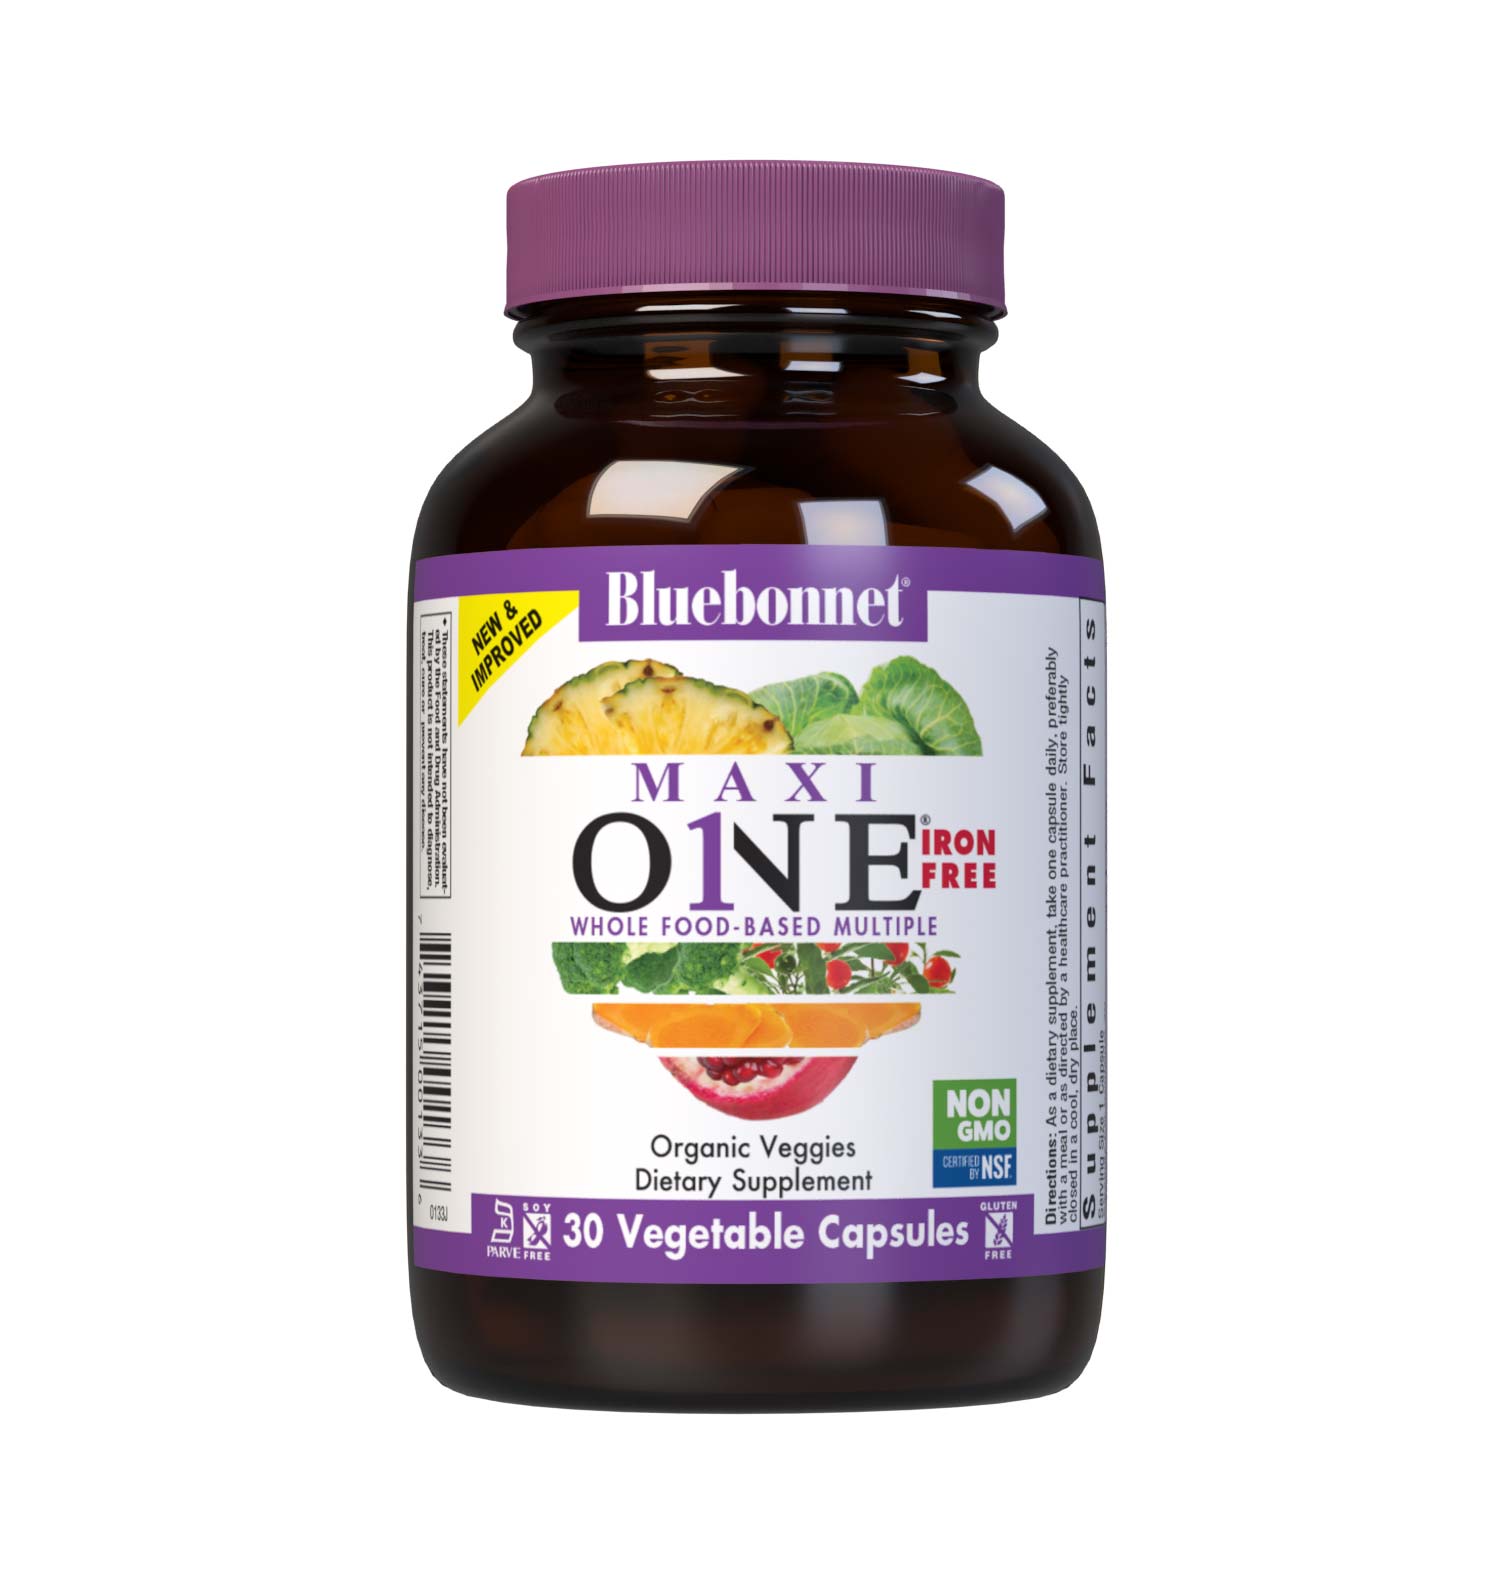 Bluebonnet’s Maxi ONE formula (Iron-Free) 30 vegetable capsules is a higher potency, single daily multivitamin and multimineral dietary supplement in a capsule and is formulated with highly efficient patented Albion chelated minerals, vitamin K2 from natto, select coenzyme B vitamins along with energy & vitality, organic whole food, and plant source enzyme blends. #size_30 count